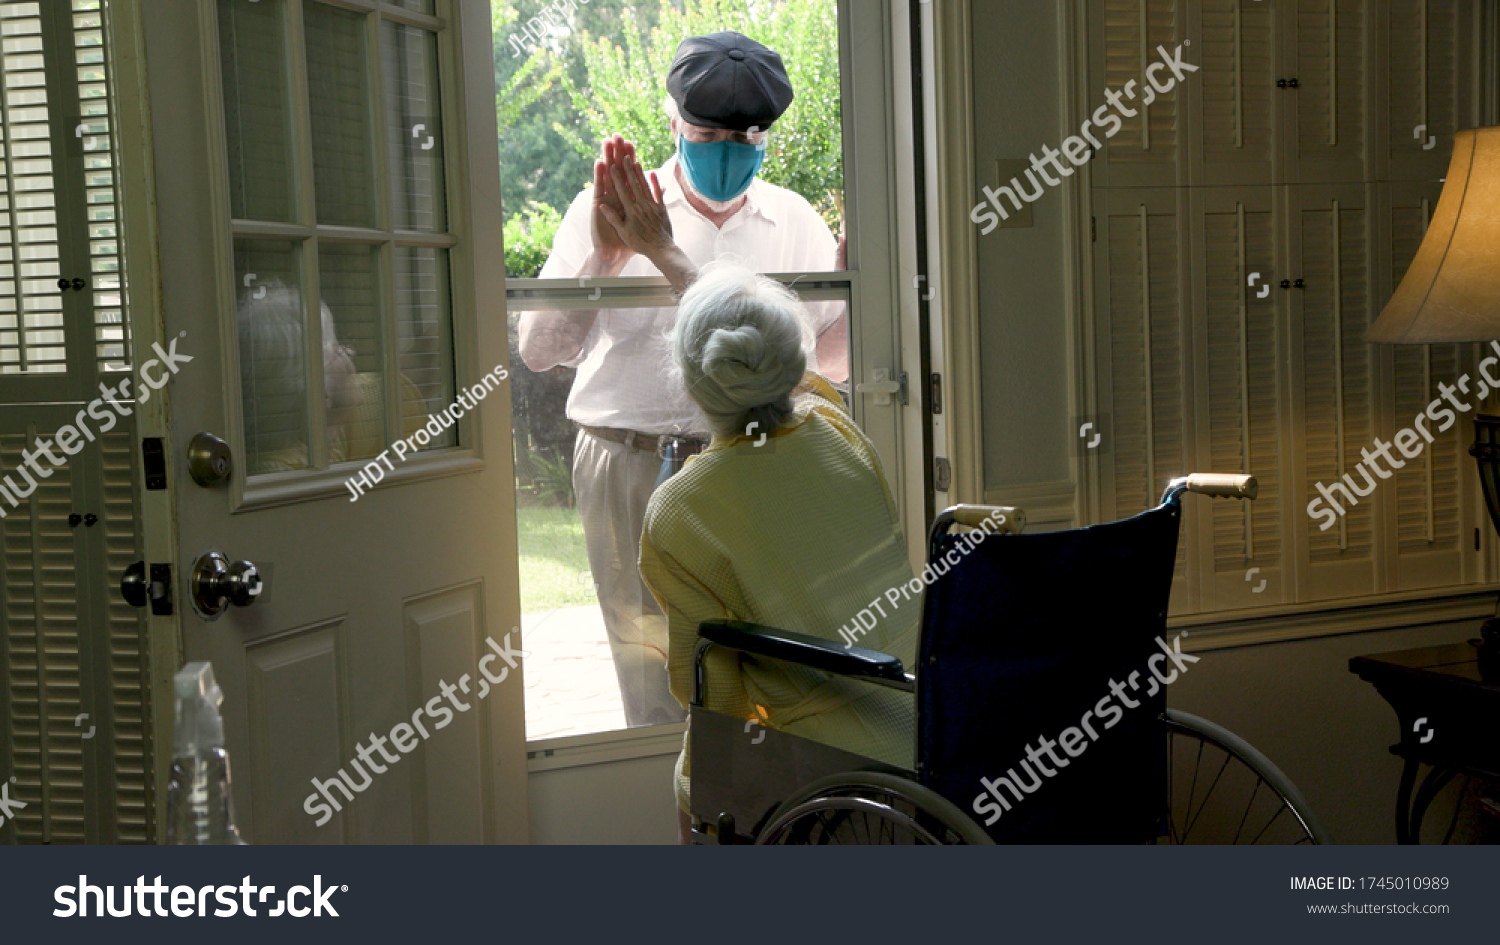 An elderly woman in a wheelchair social distancing because of COVID19 visits with a caring relative or neighbor through her glass storm door. #1745010989